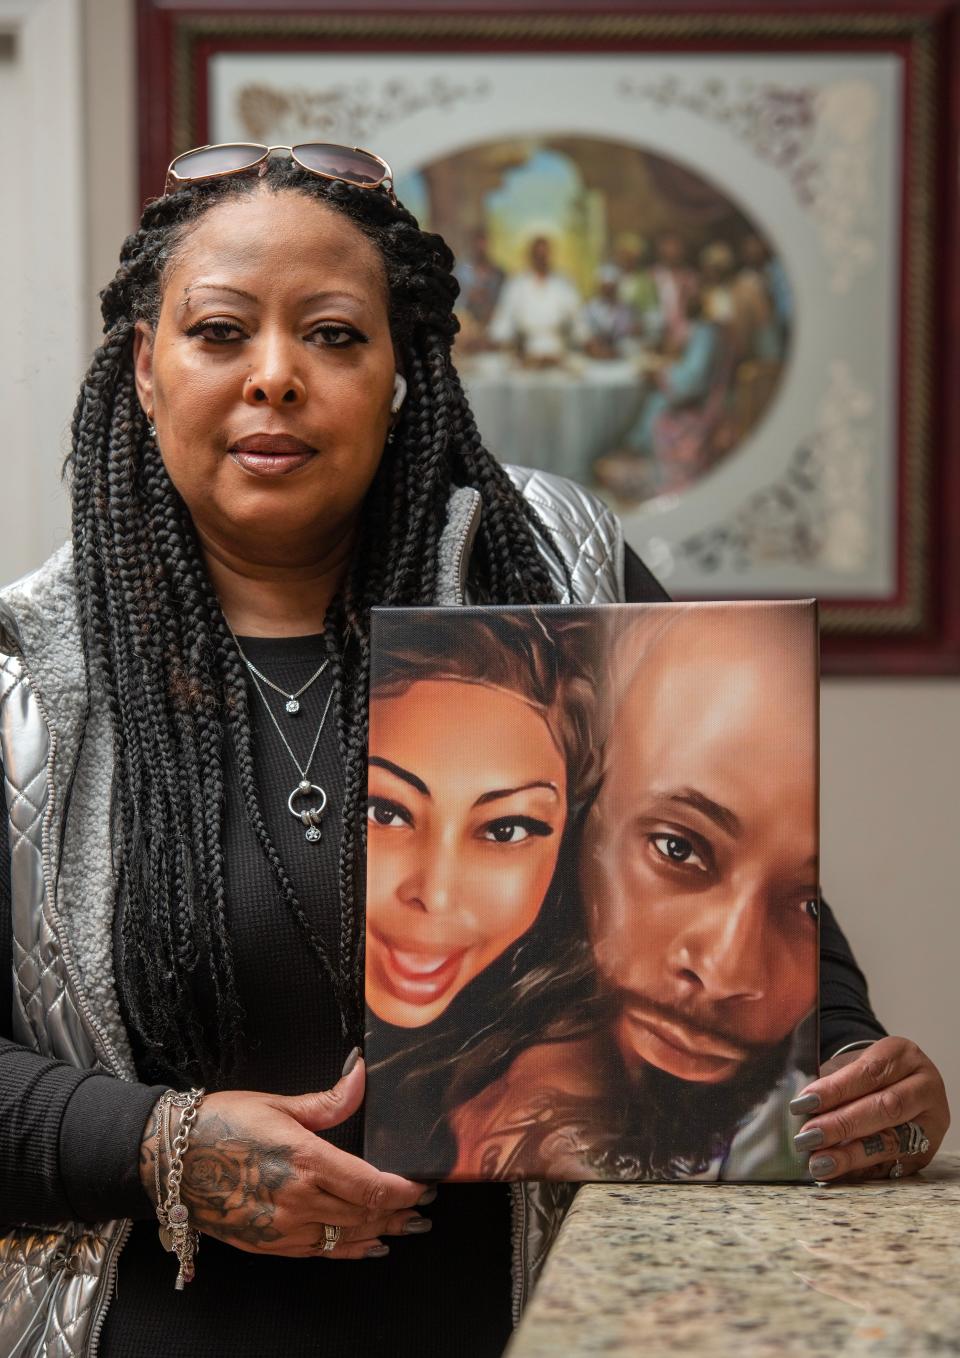 Diyawn Caldwell, founder and president of Both Sides of the Wall, and organizer of the Alabama Prison Strike, with a picture of her and her husband Cordarius Caldwell at her home in Pensacola Florida Sunday, January 8, 2023. Her husband is in an Alabama prison.